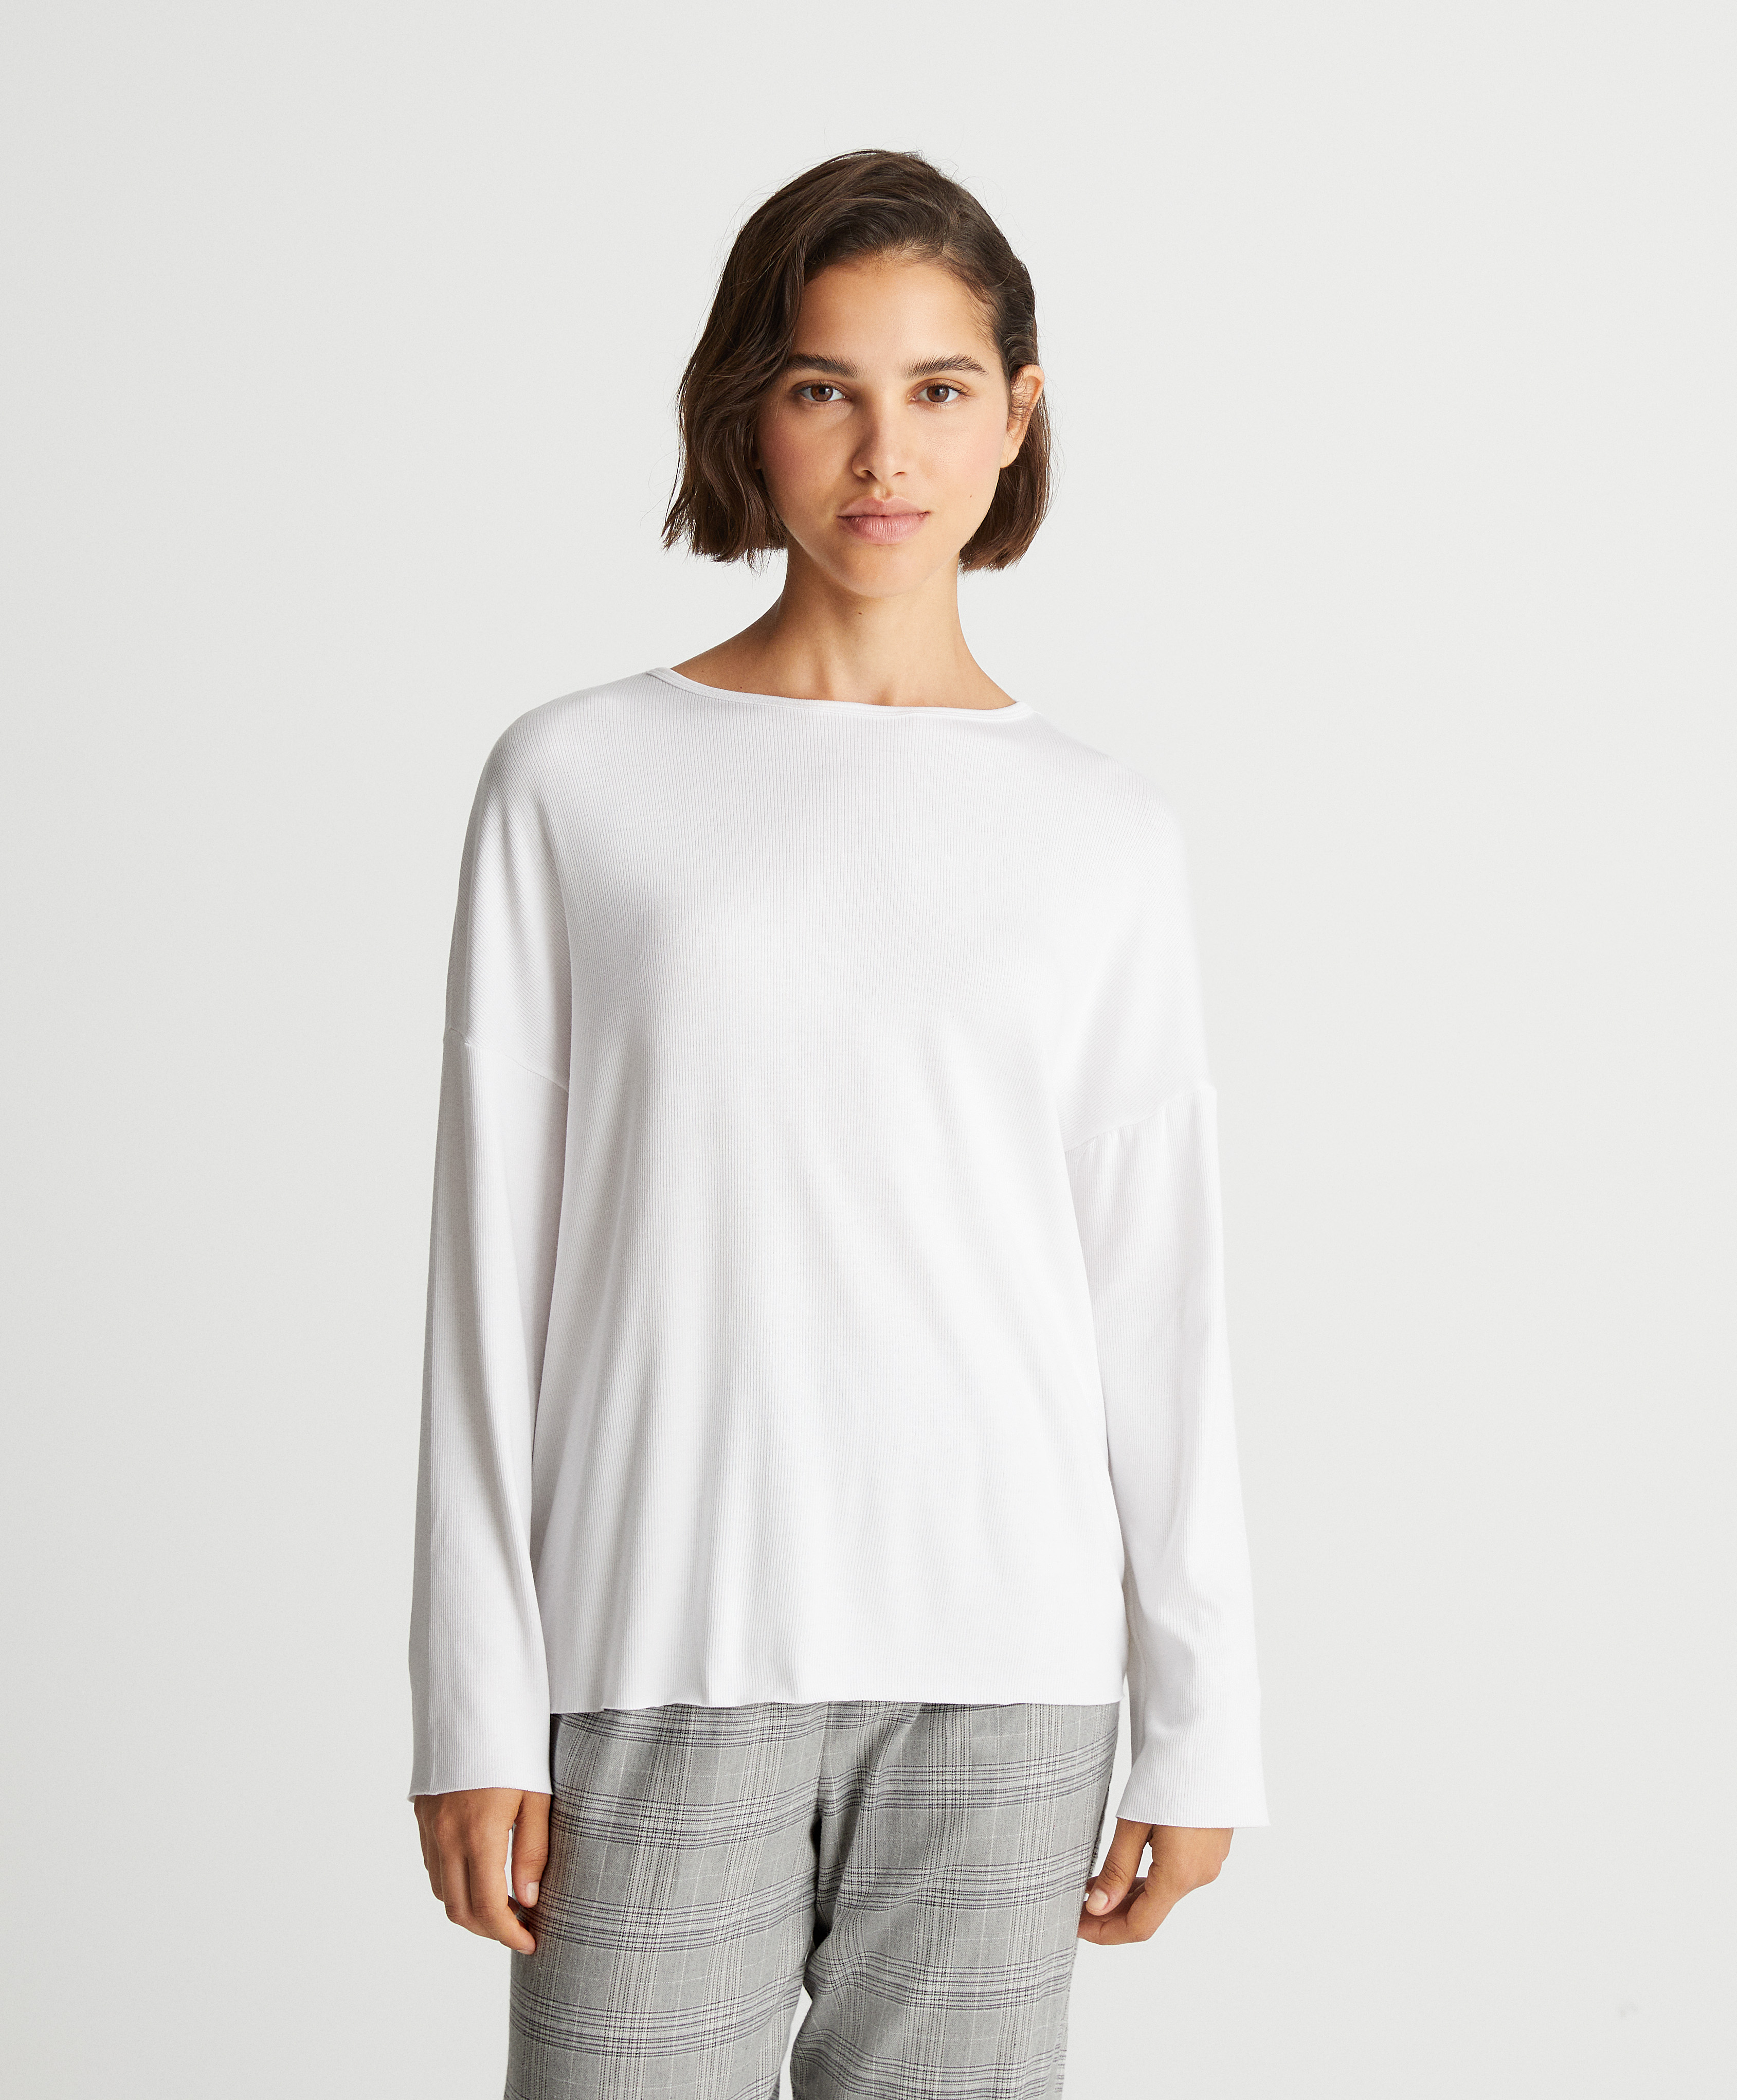 Long-sleeved cotton and modal top